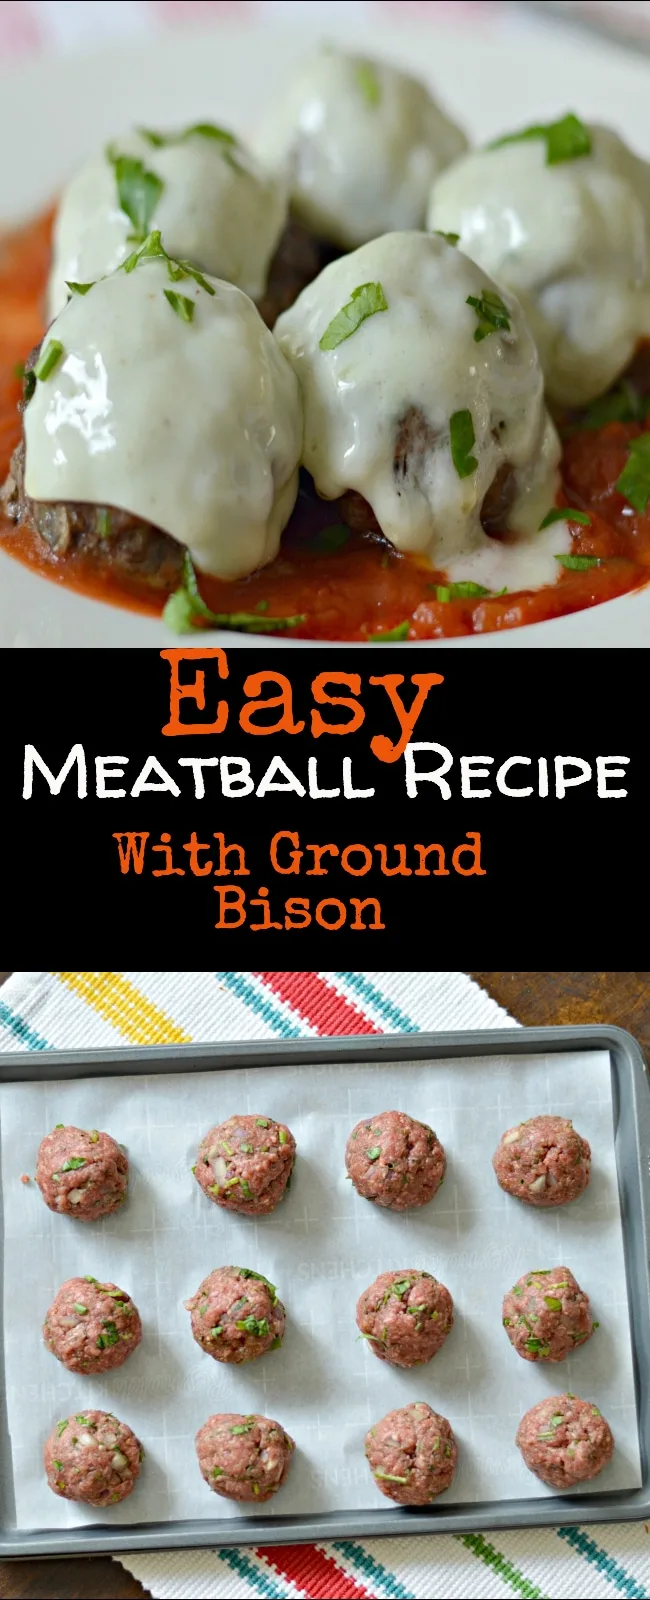 This easy meatball recipe is made with lean bison meat, and seasoned perfectly for a delicious, flavorful meal. 